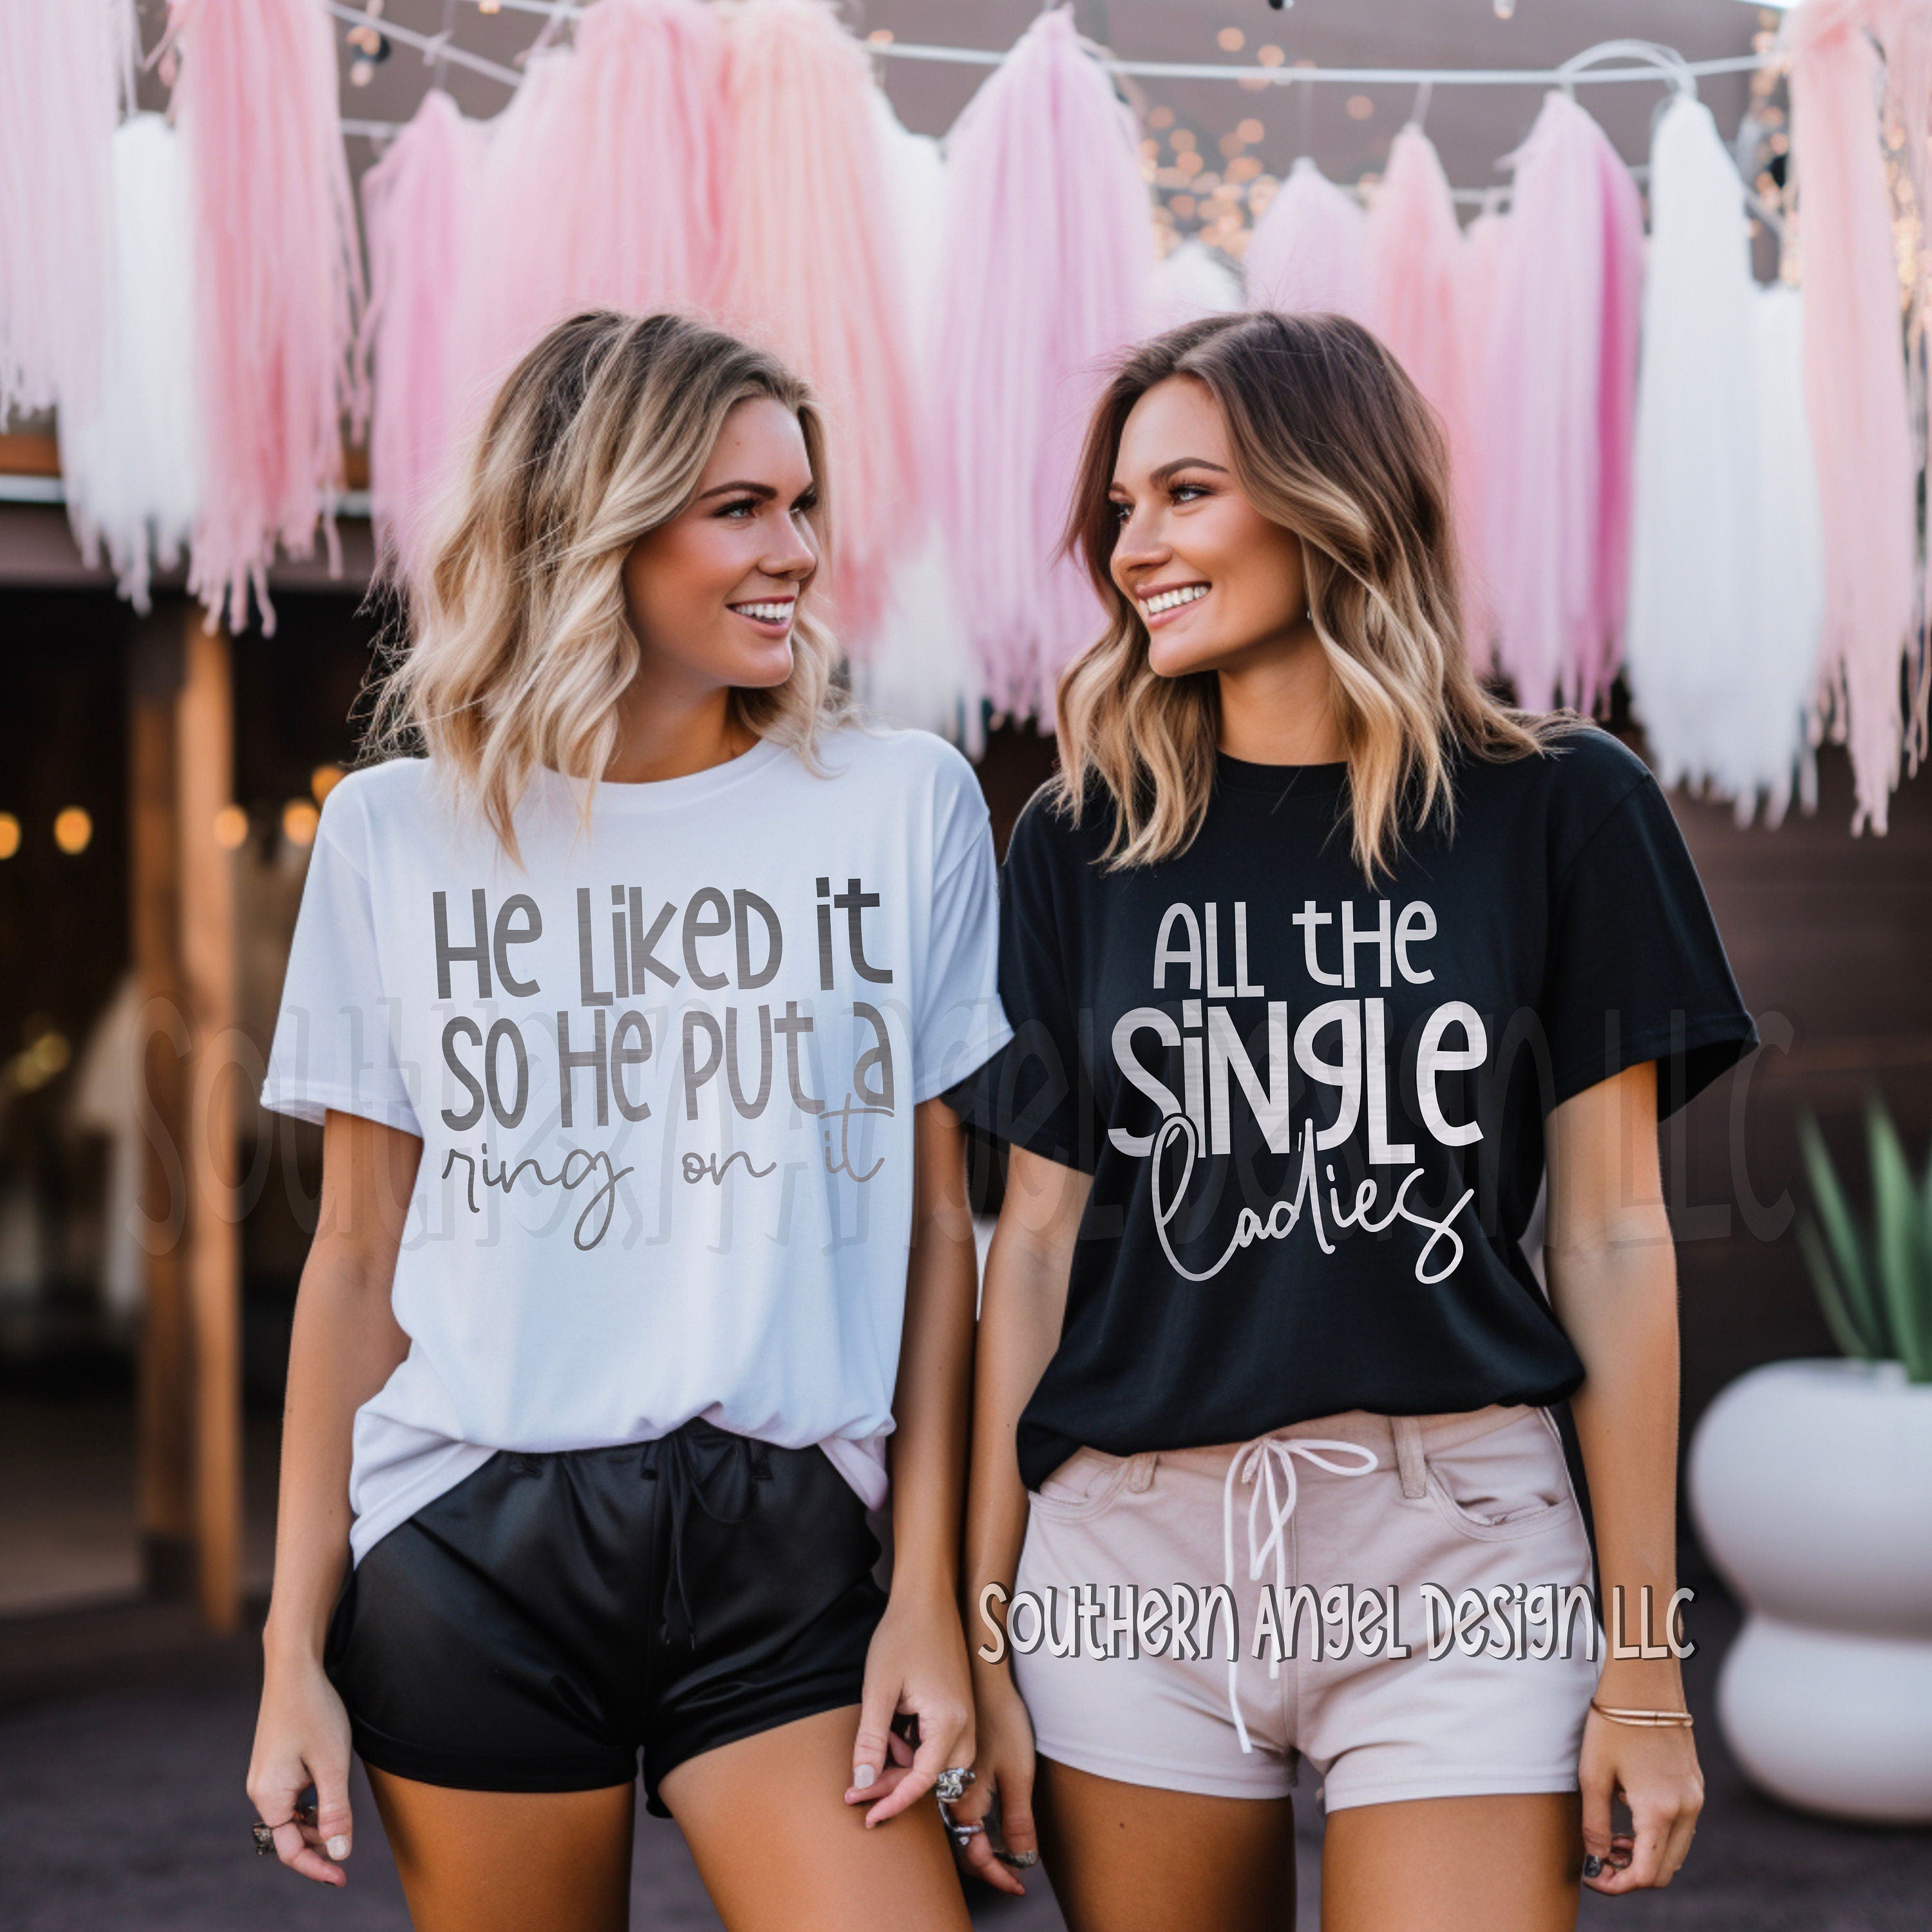 Bachelorette party shirt | It’s a love story | Music lyric shirt | Bridal shower | Party shirt | Girls trip | Merry you with paper rings